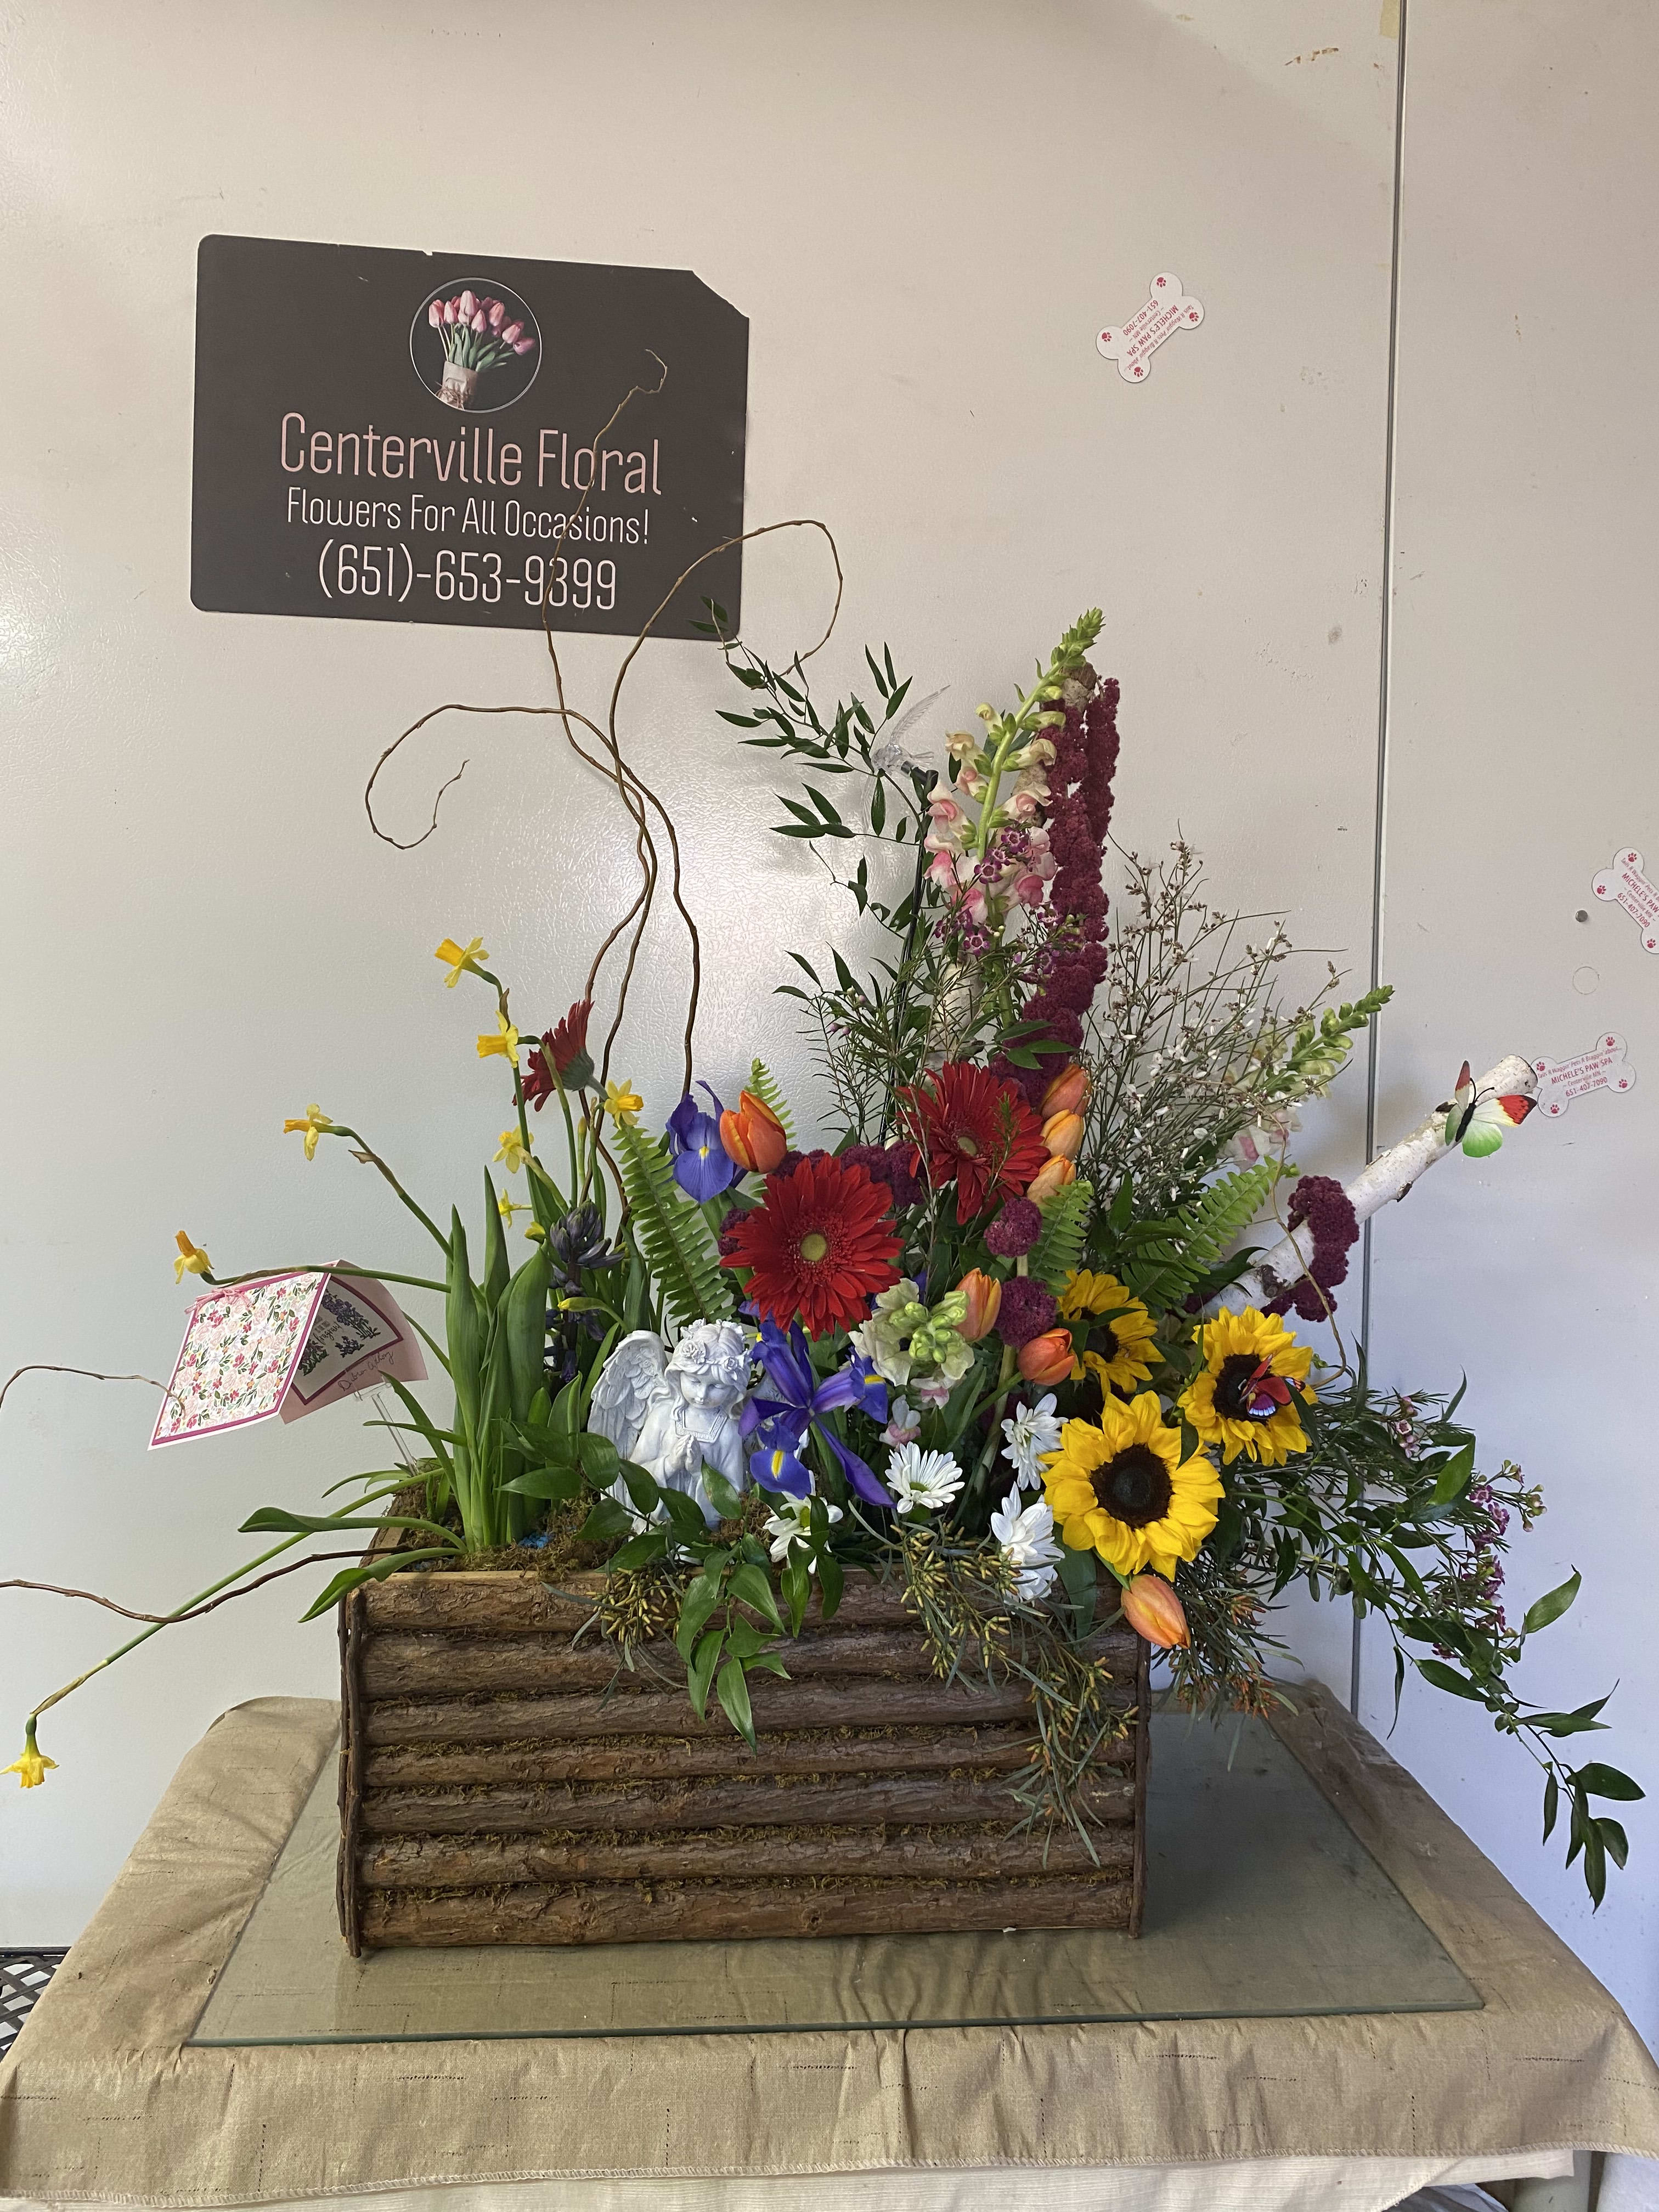 sunflowers, gerberas, and rustic items - We can make this arrangement to your liking. We customize all arrangements